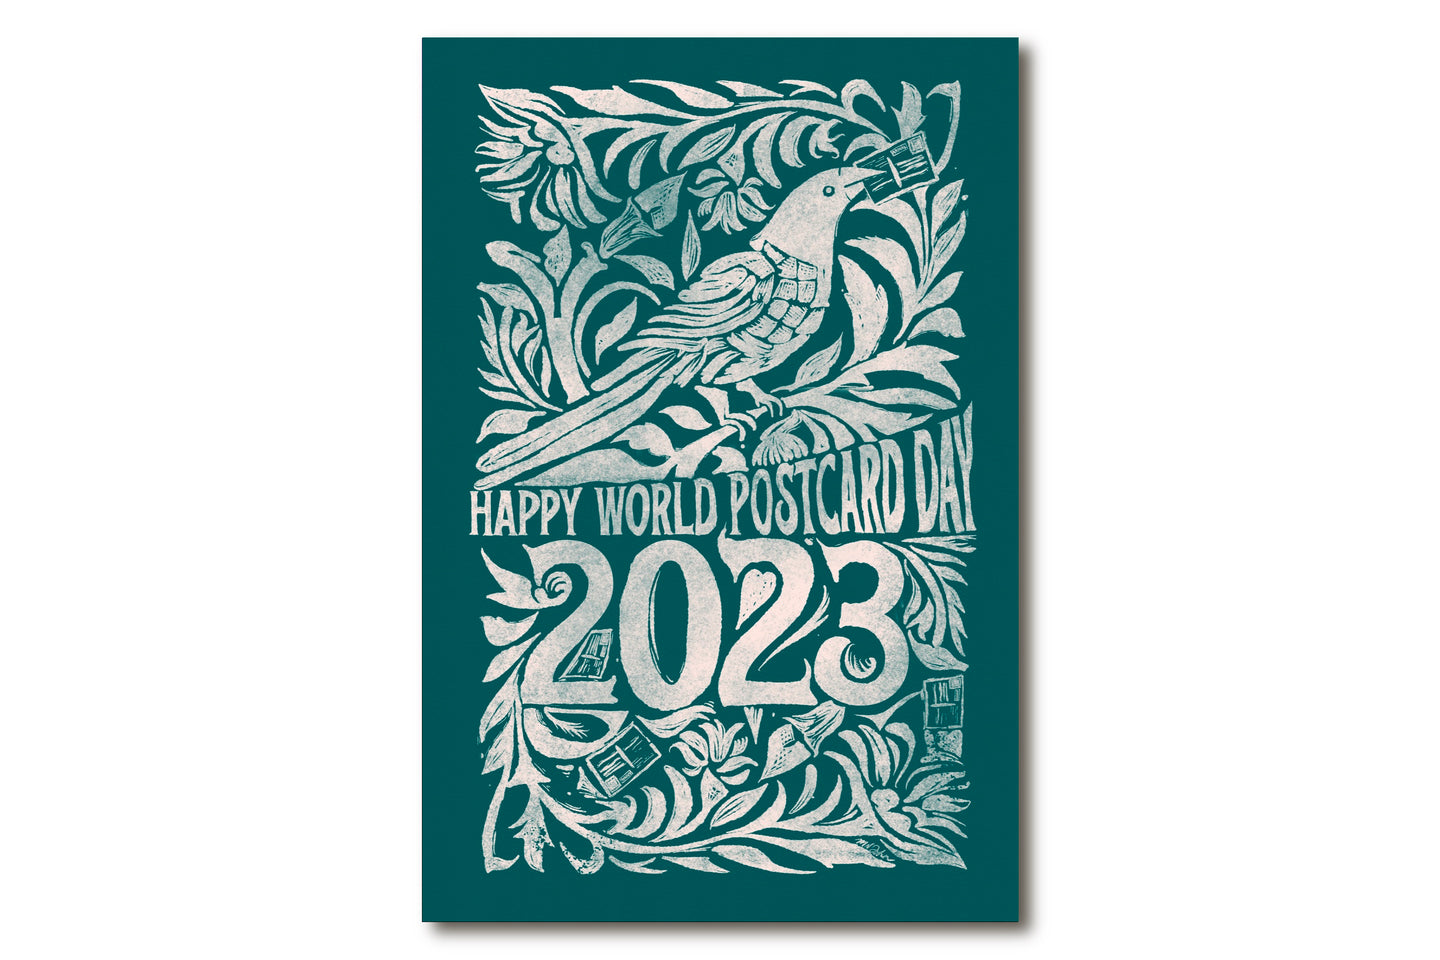 World Postcard Day 2023 Cards - Teal and White - NEW